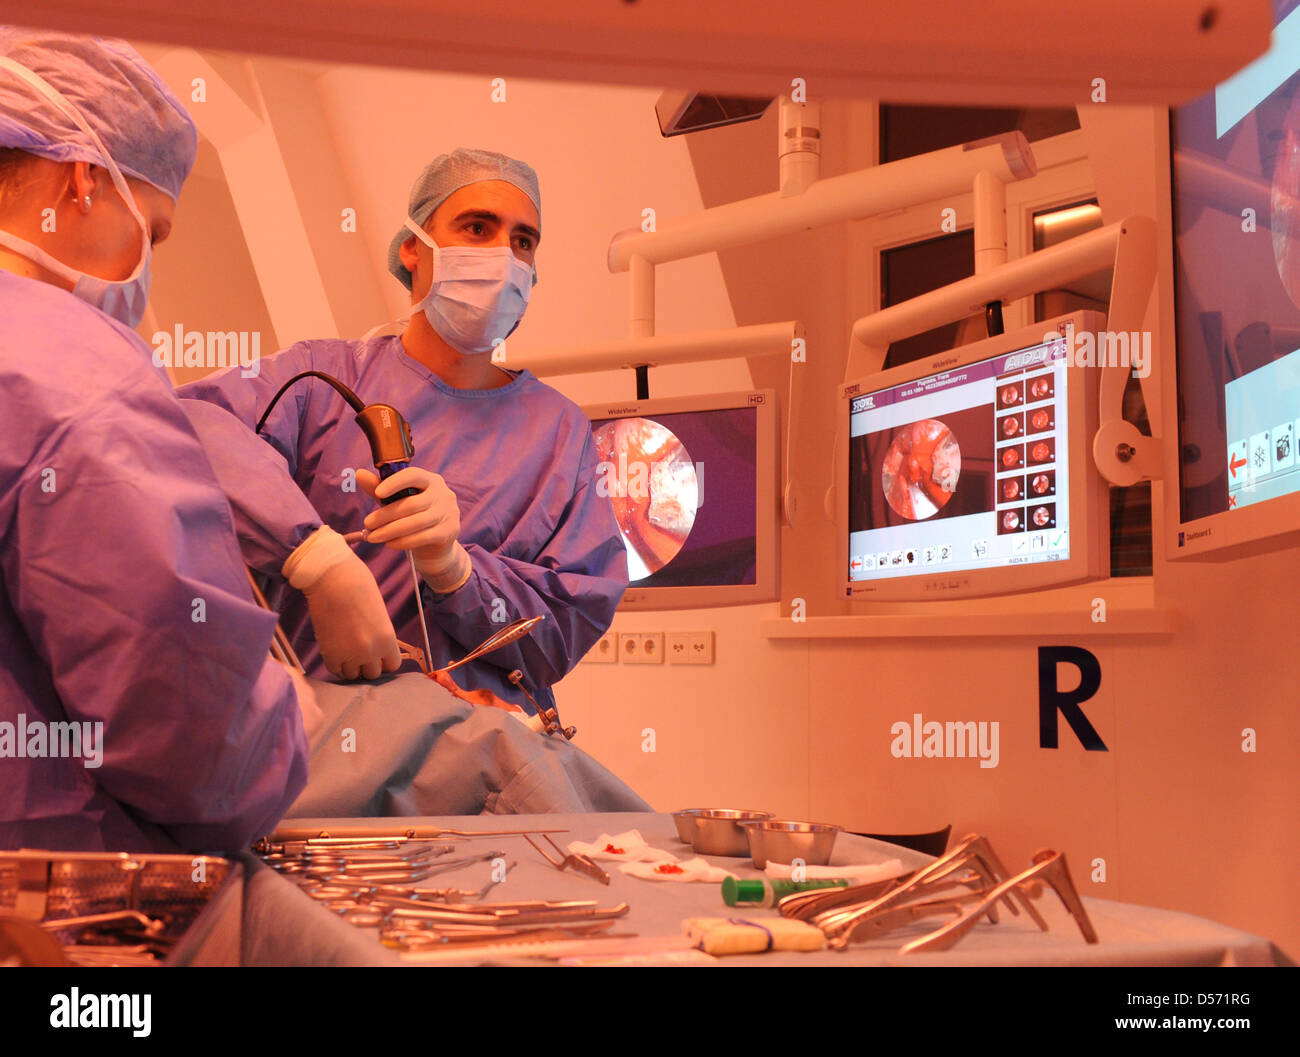 A file picture dated 11 March 2010 of Surgeon Gero Strauss (R) operating on a patient's nose under red light in a worldwide unique hightech operating room of International Reference and Development Centre for Surgical Technology (IRDC) in Leipzig, Germany. The operating room cooperates with Technichal University Munich and University Leipzig. Photo: WALTRAUD GRUBITZSCH Stock Photo